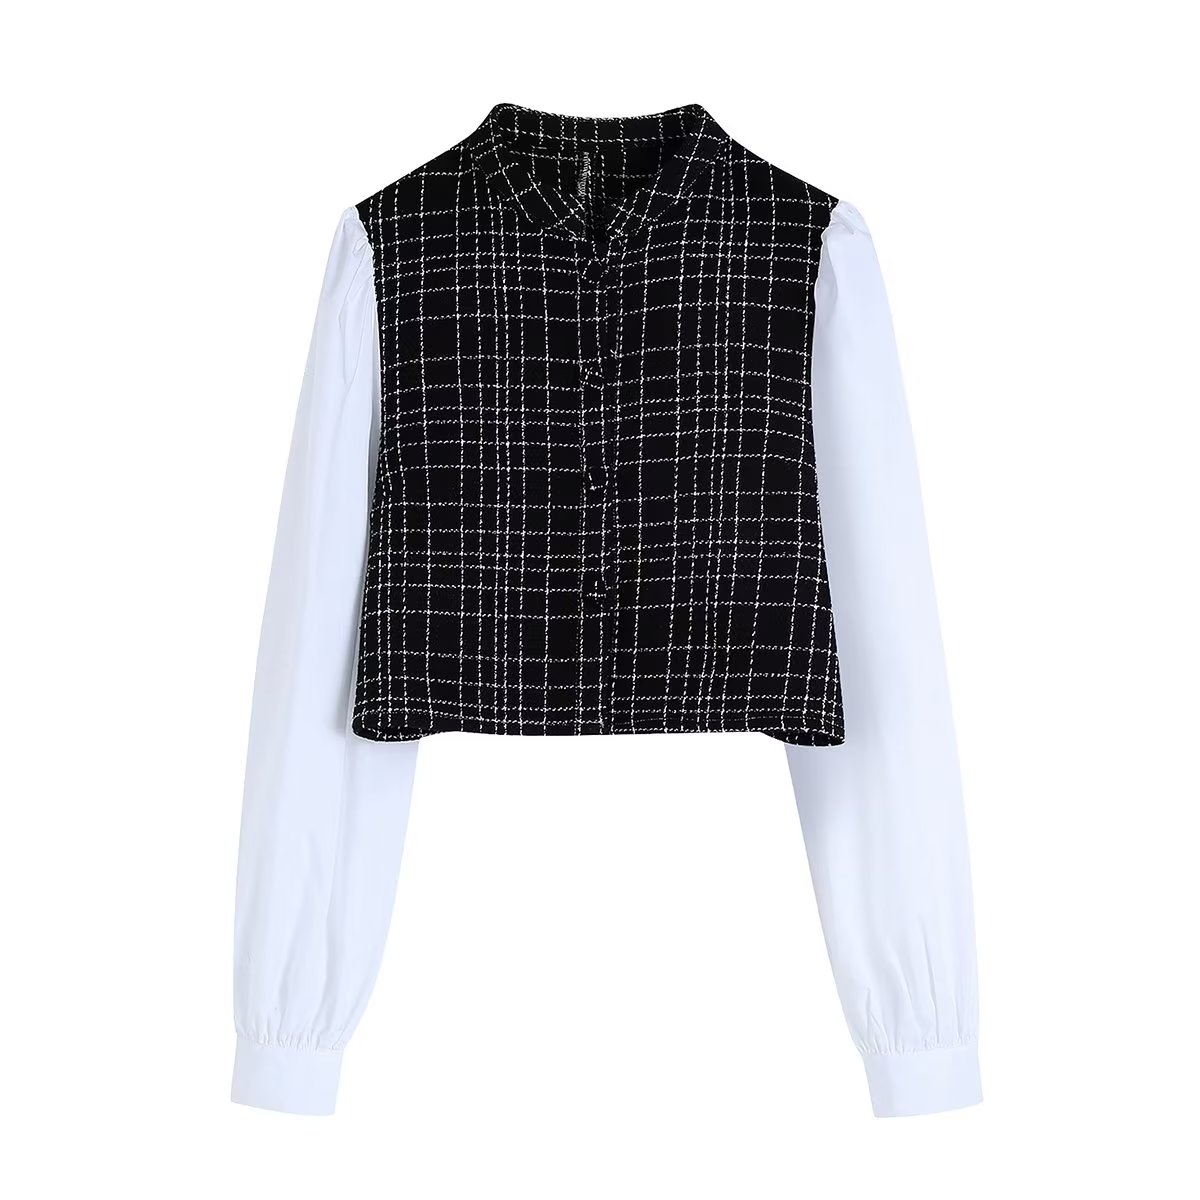 Black and White Patchwork Shirt